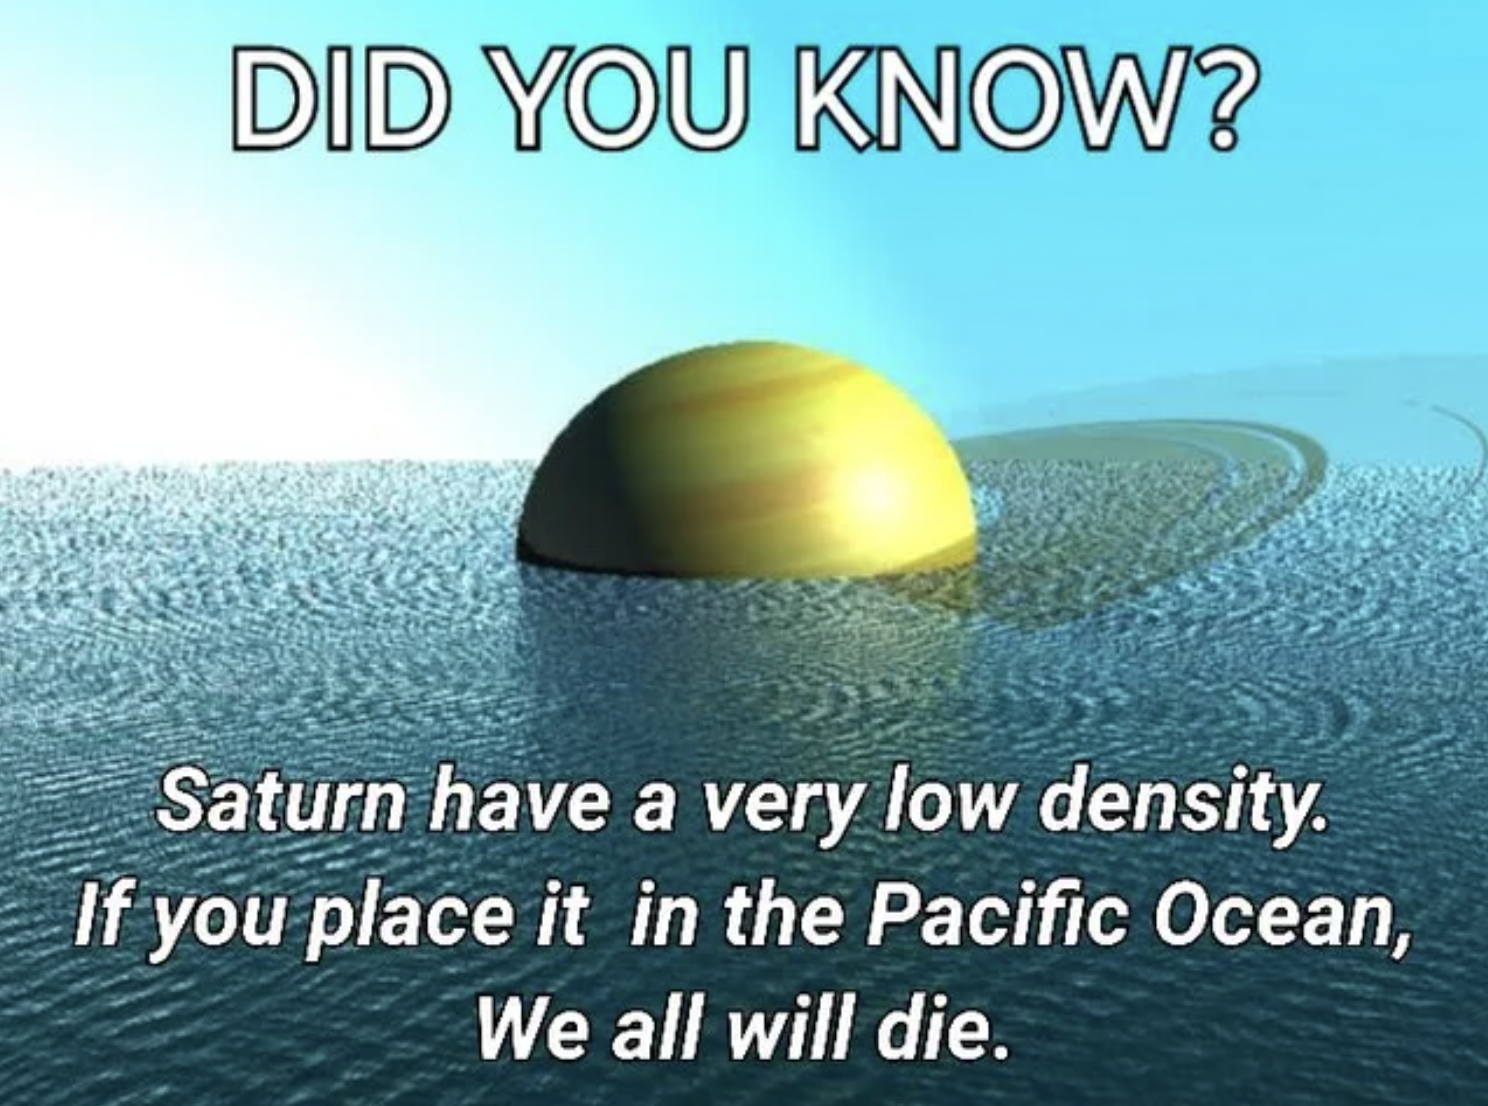 Memes That Technically Tell the Truth - water resources - Did You Know? Saturn have a very low density. If you place it in the Pacific Ocean, We all will die.